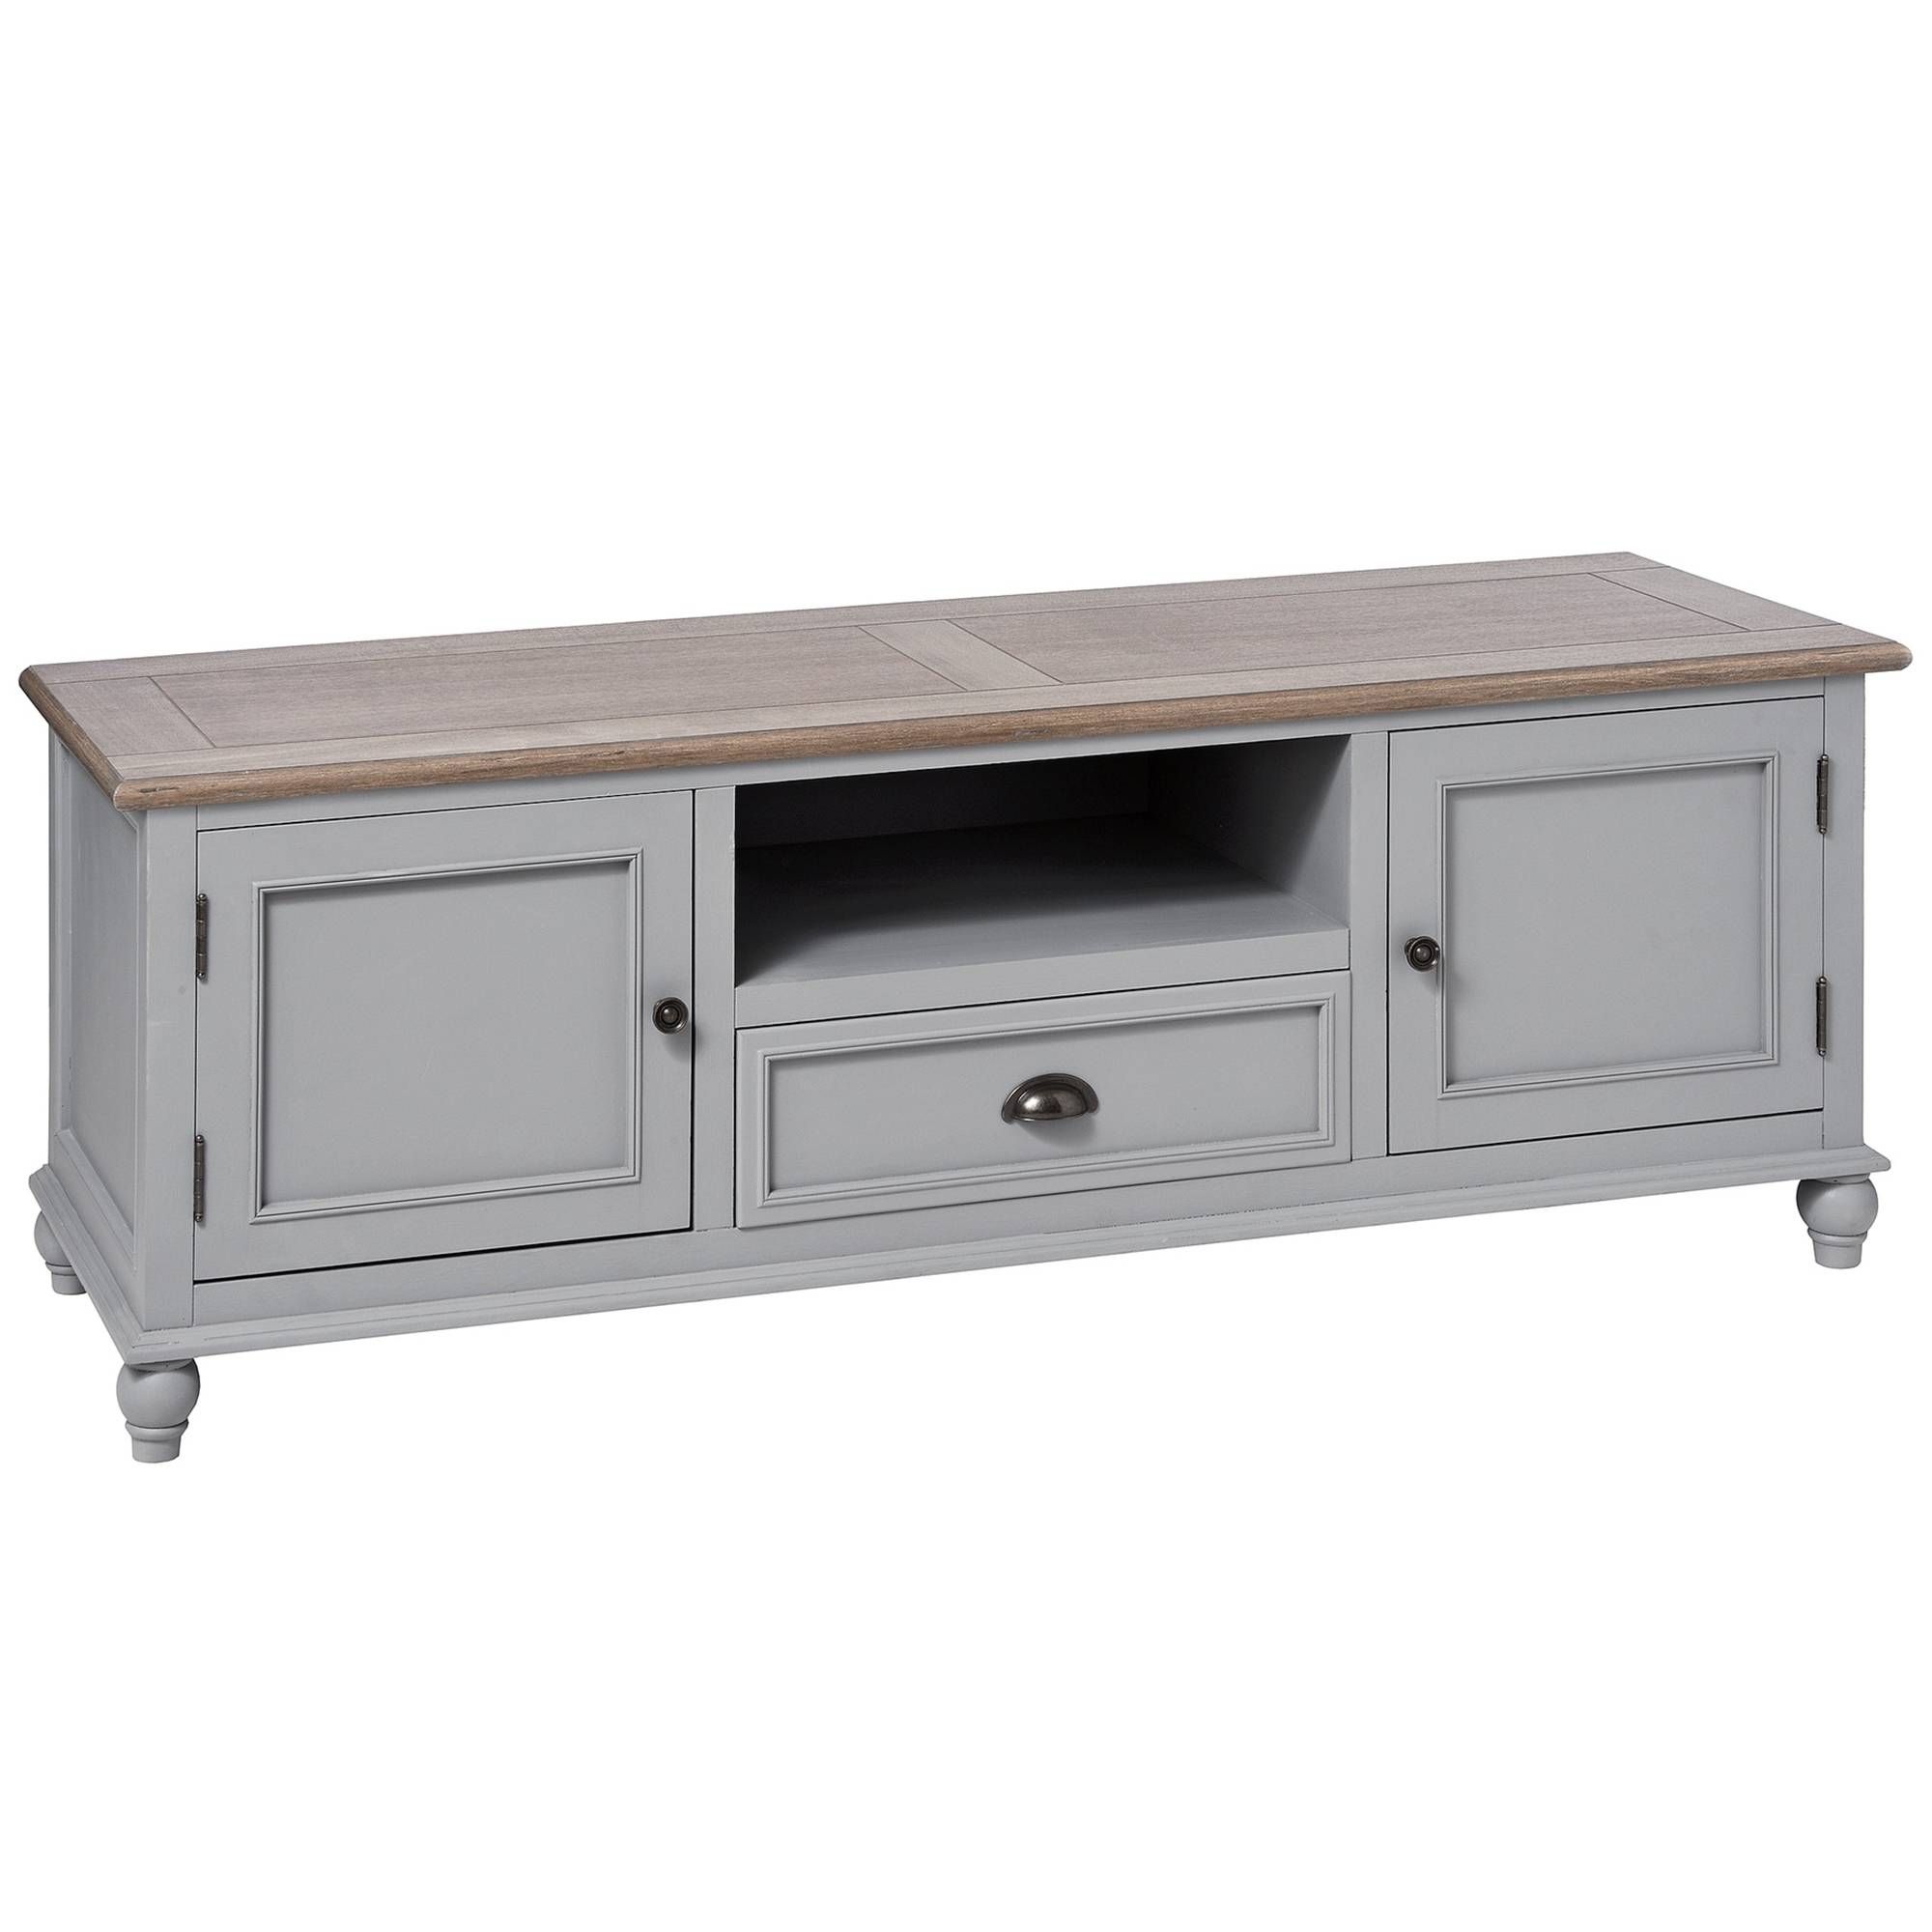 Churchill Shabby Chic Tv Cabinet | Available Now Regarding Shabby Chic Tv Cabinets (View 1 of 15)